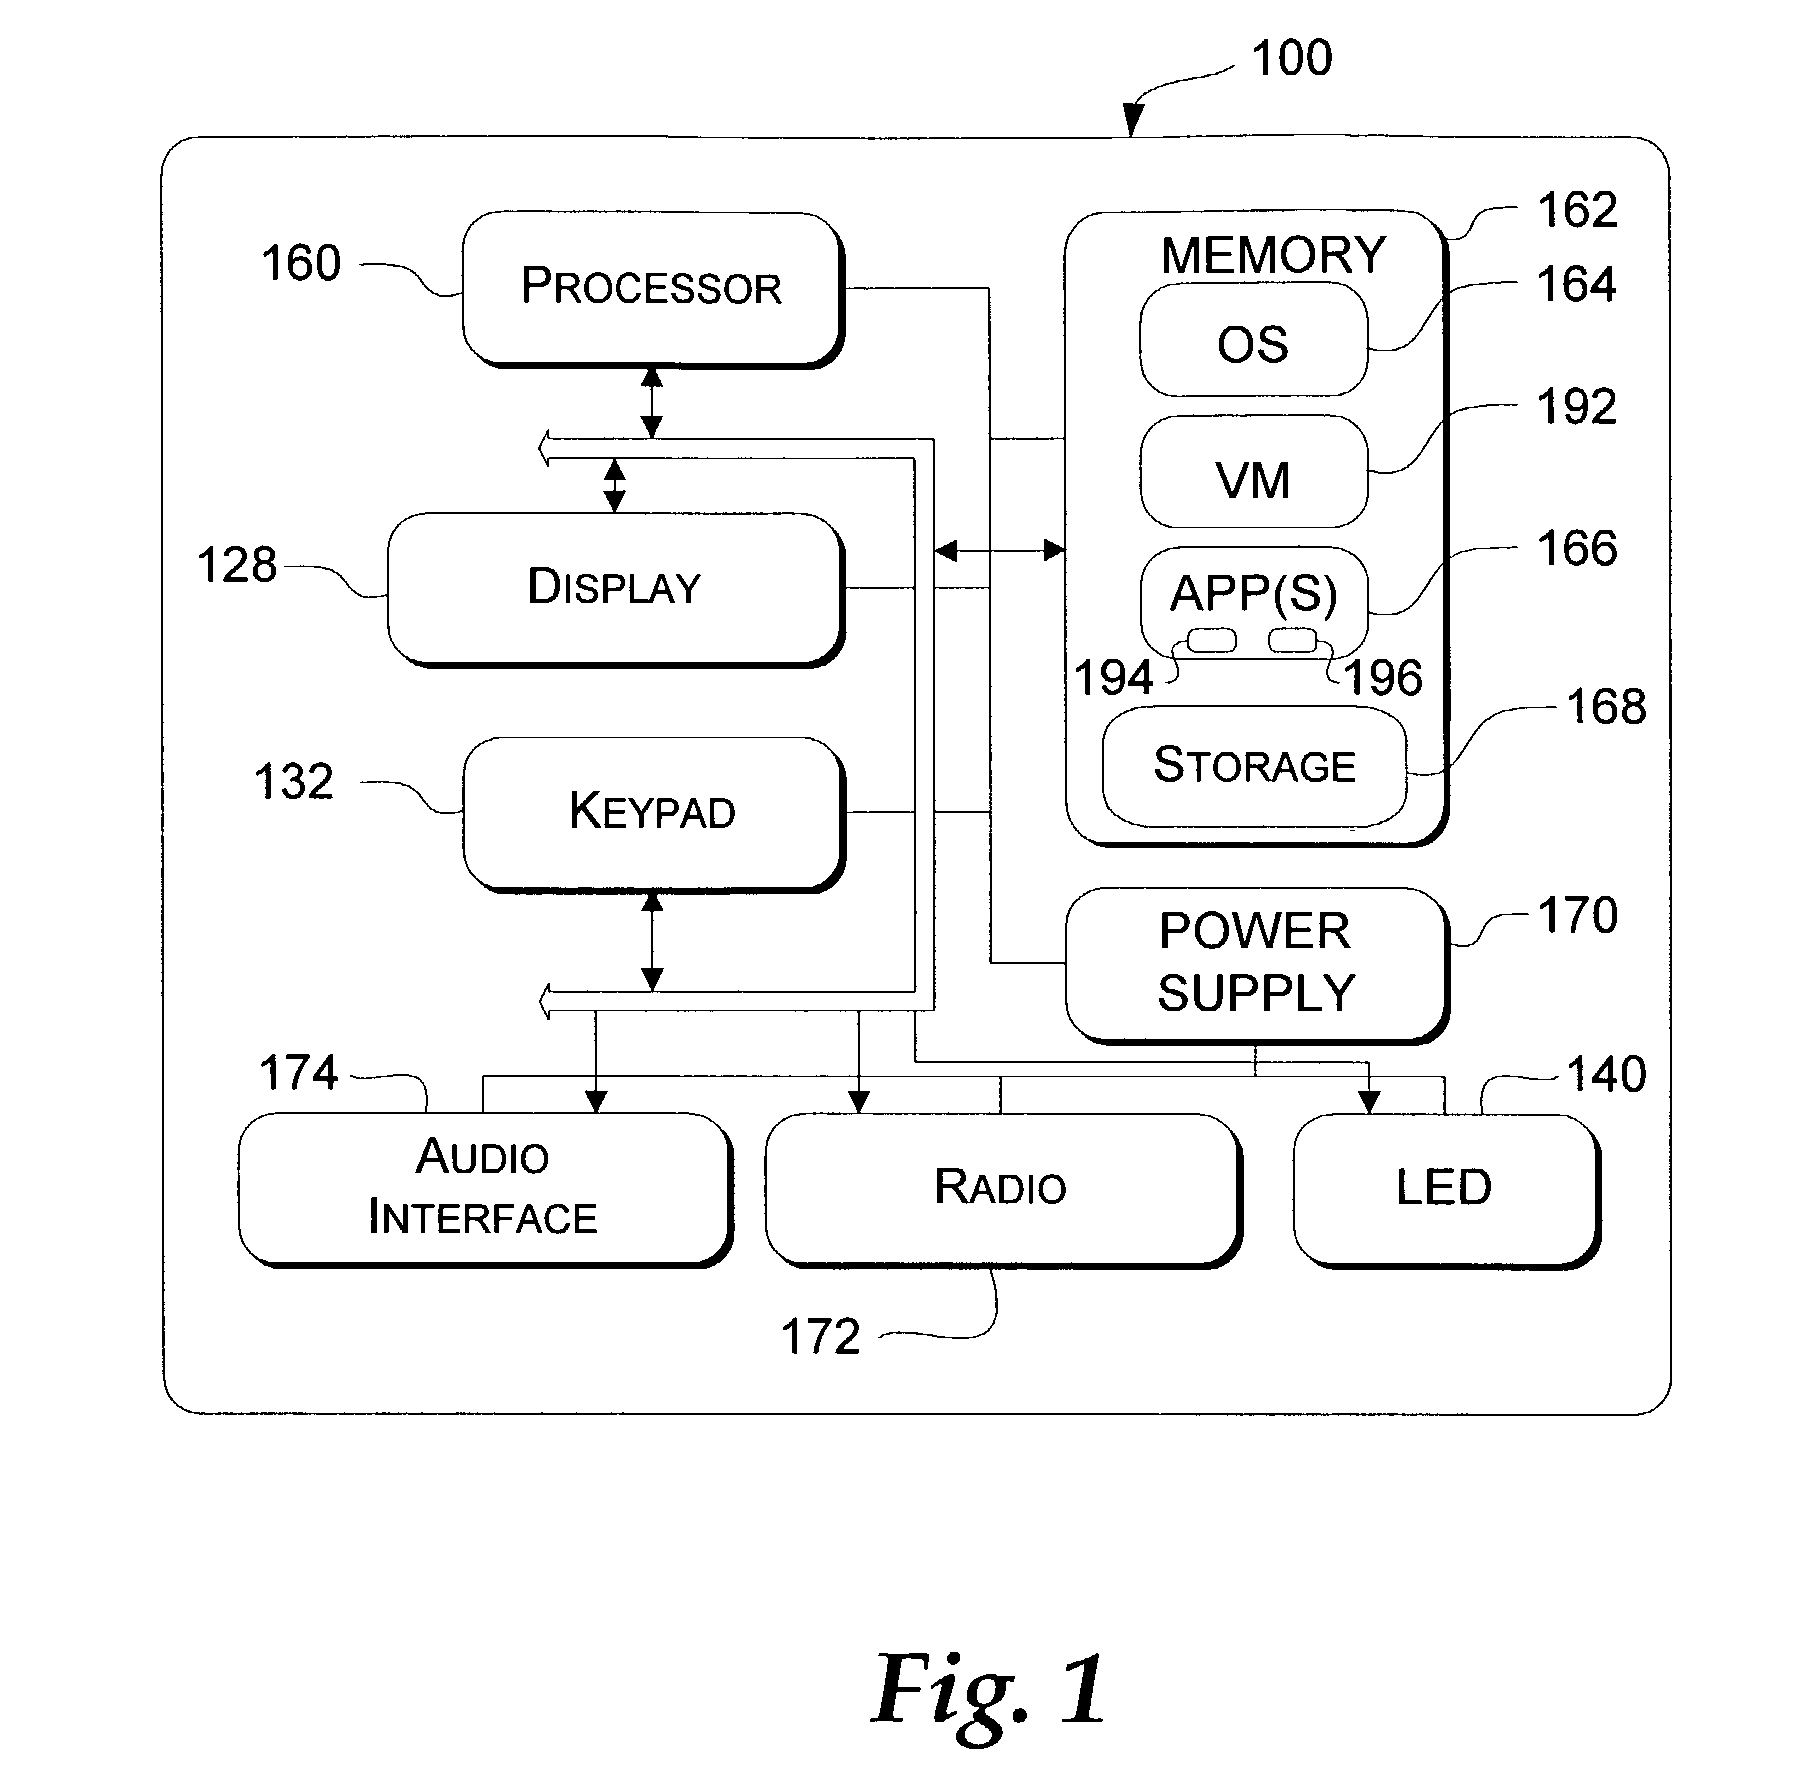 System and method for jointly managing dynamically generated code and data